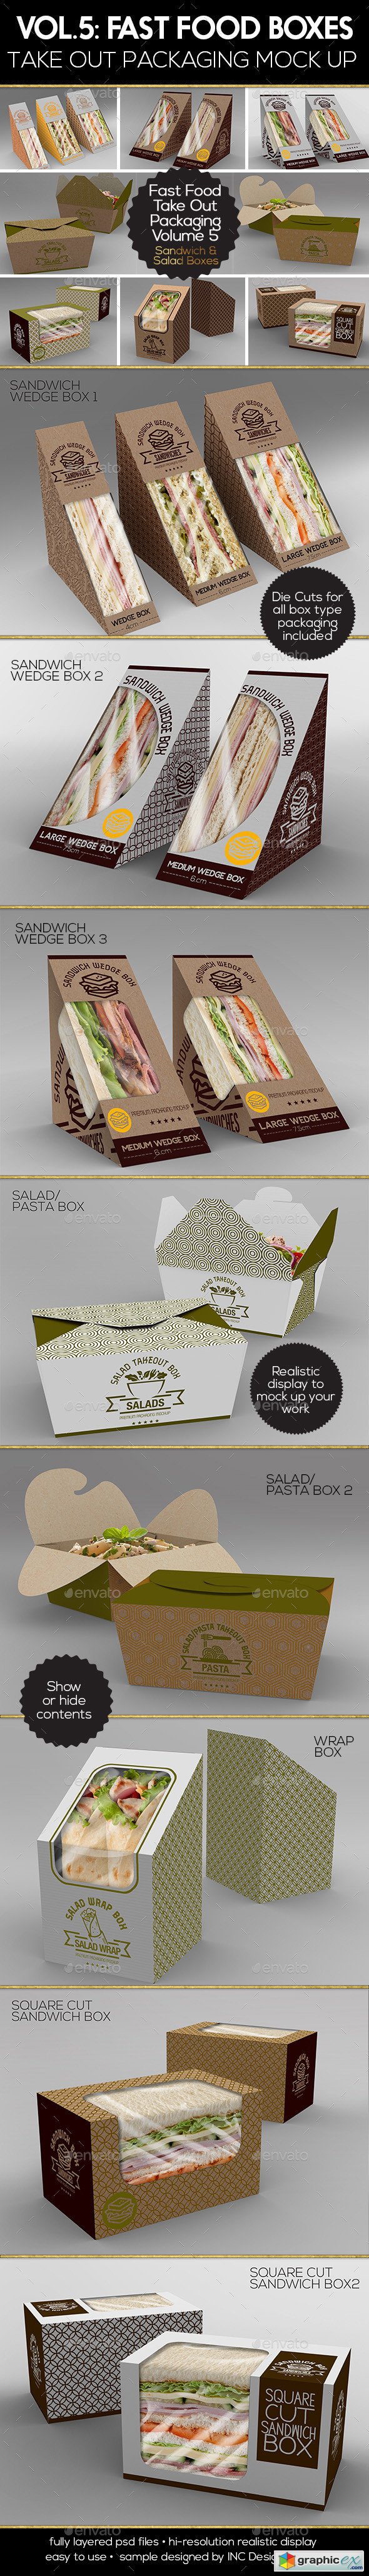 Fast Food Boxes Vol.5:Take Out Packaging Mock Ups